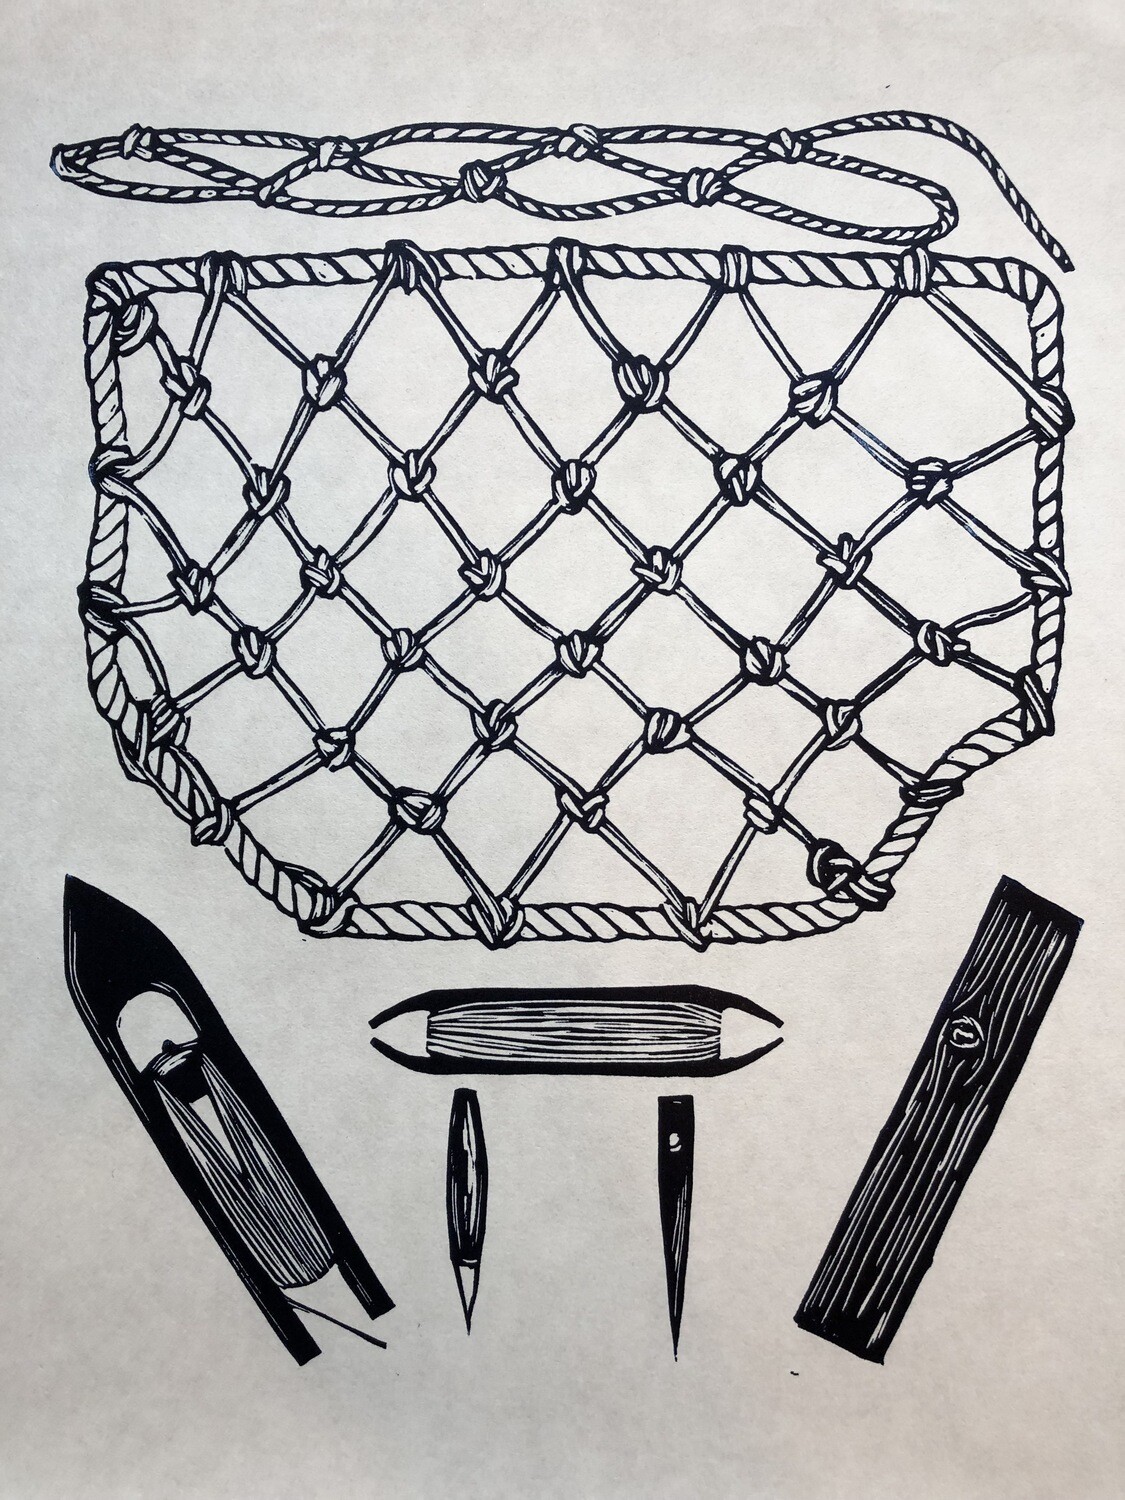 Netting and Tools